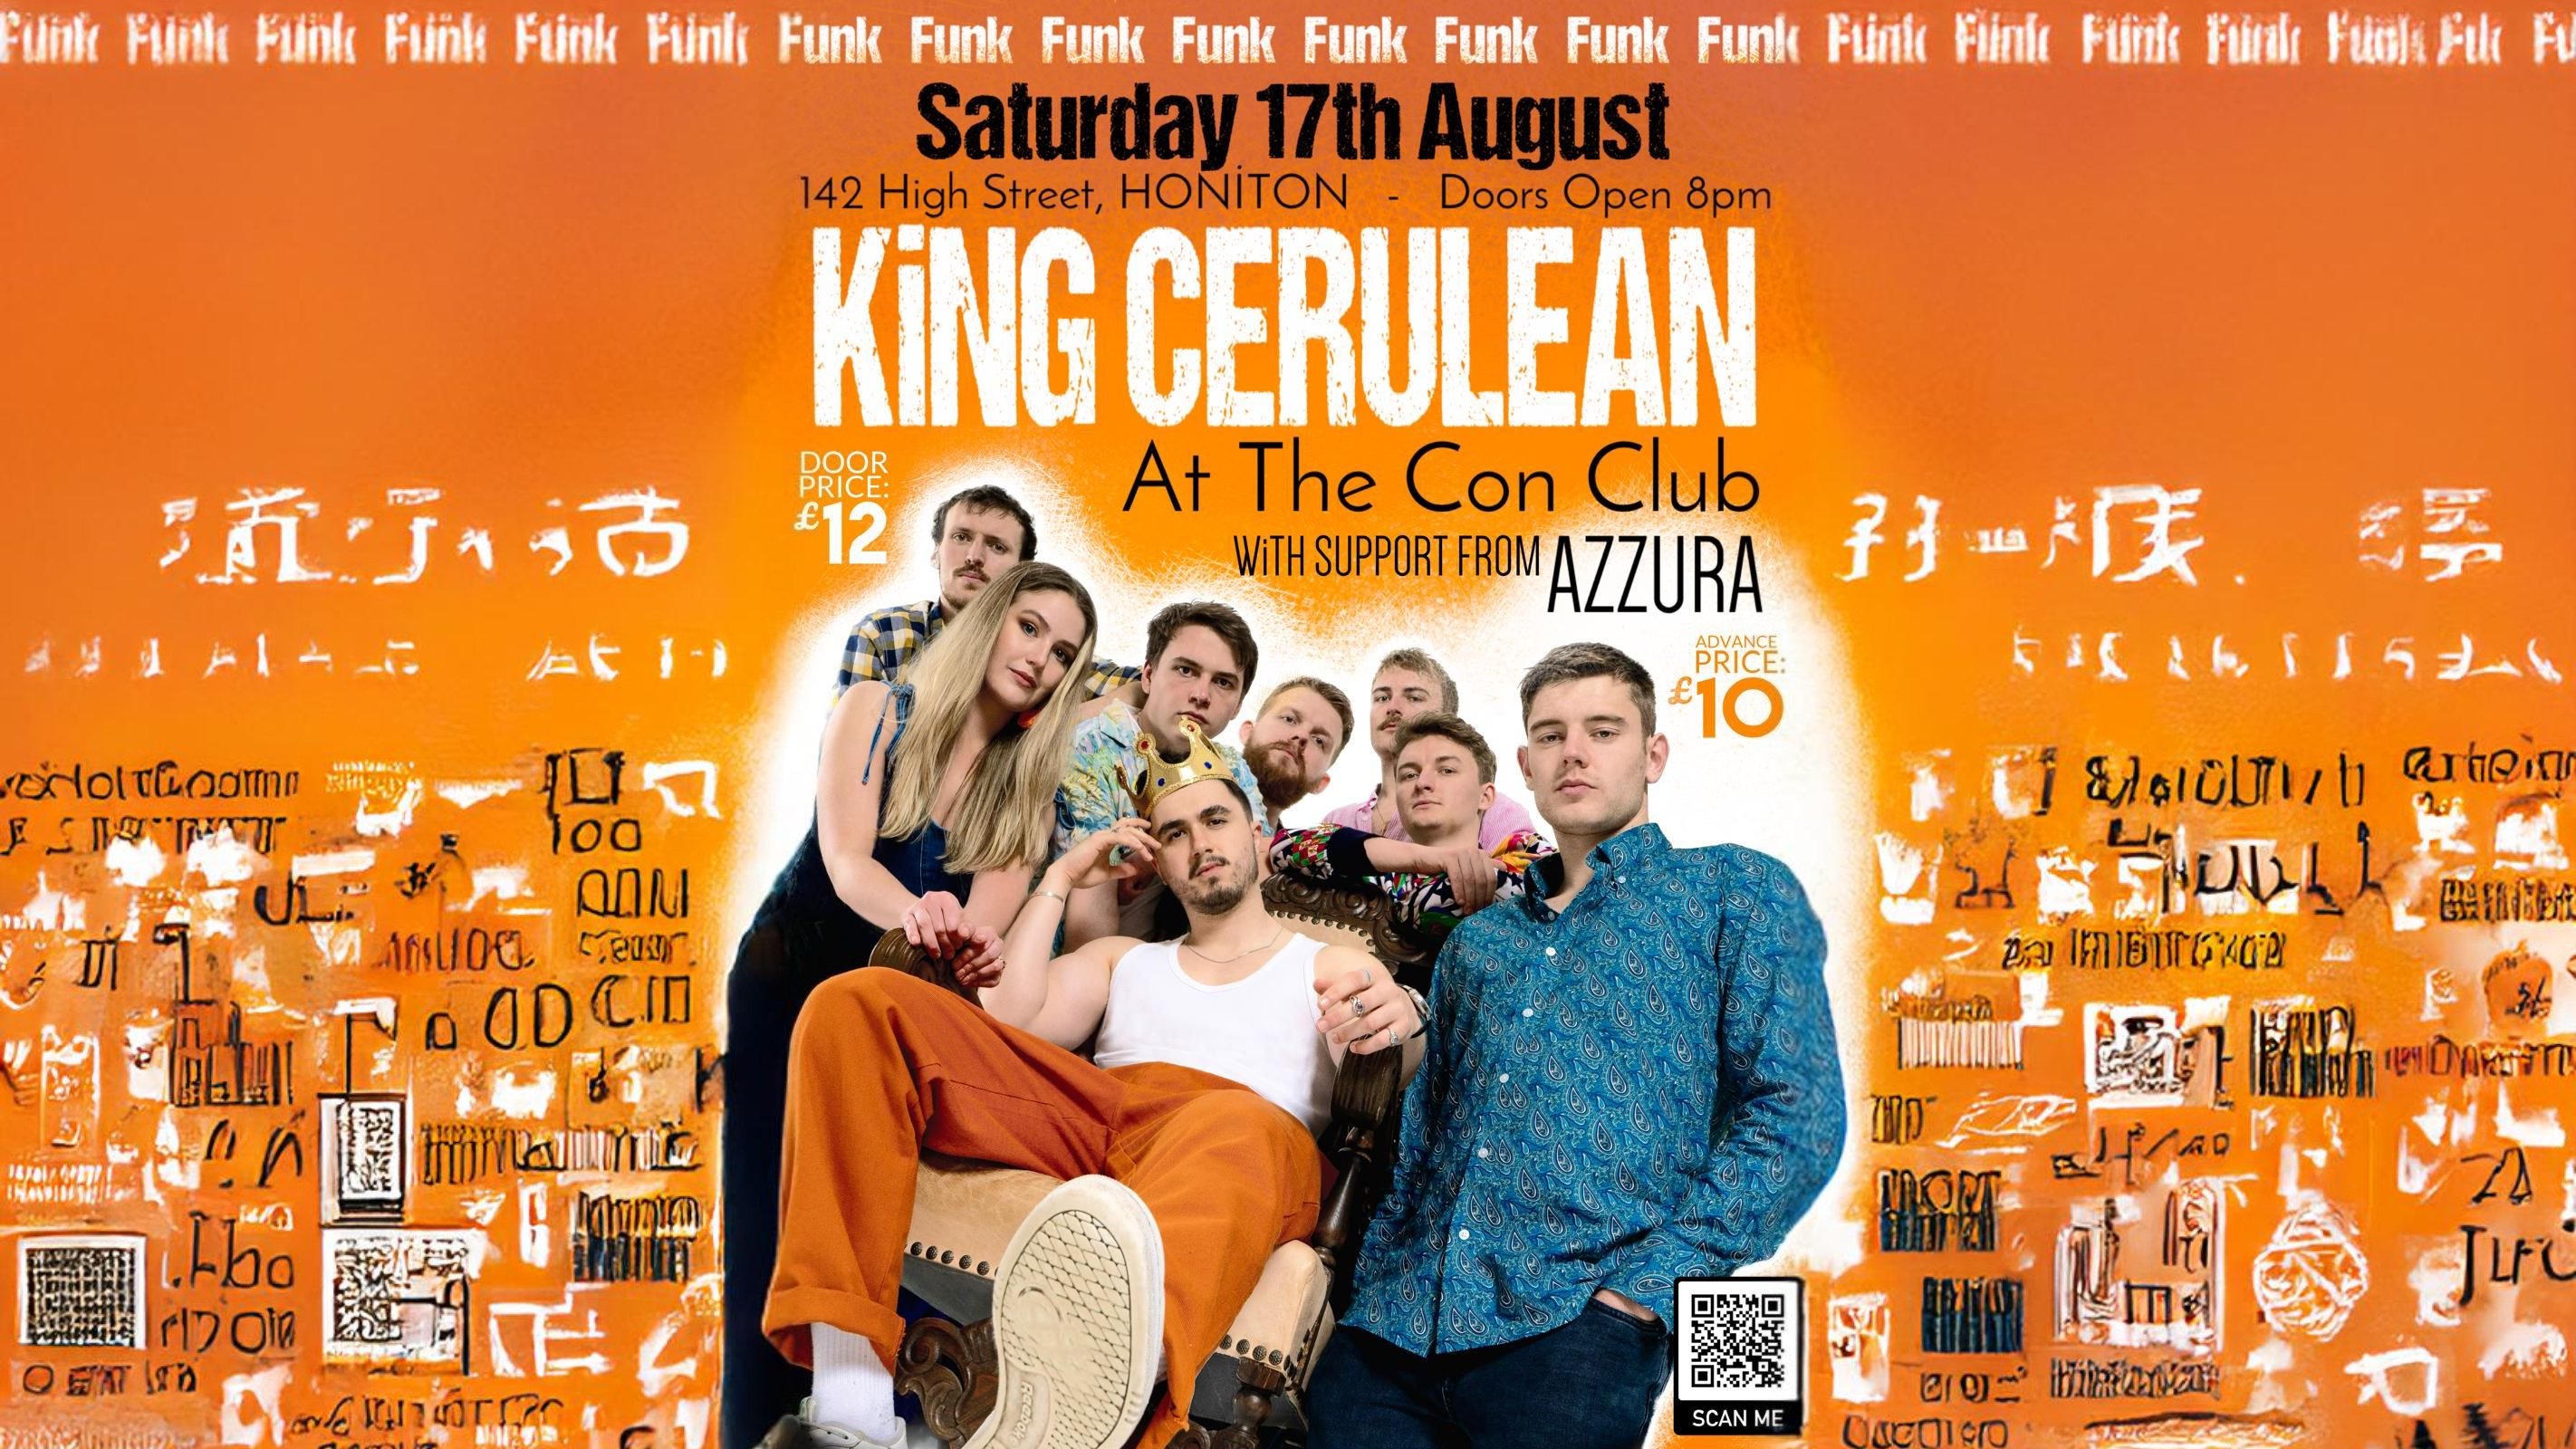 Live Music by King Cerulean supported by Azzura